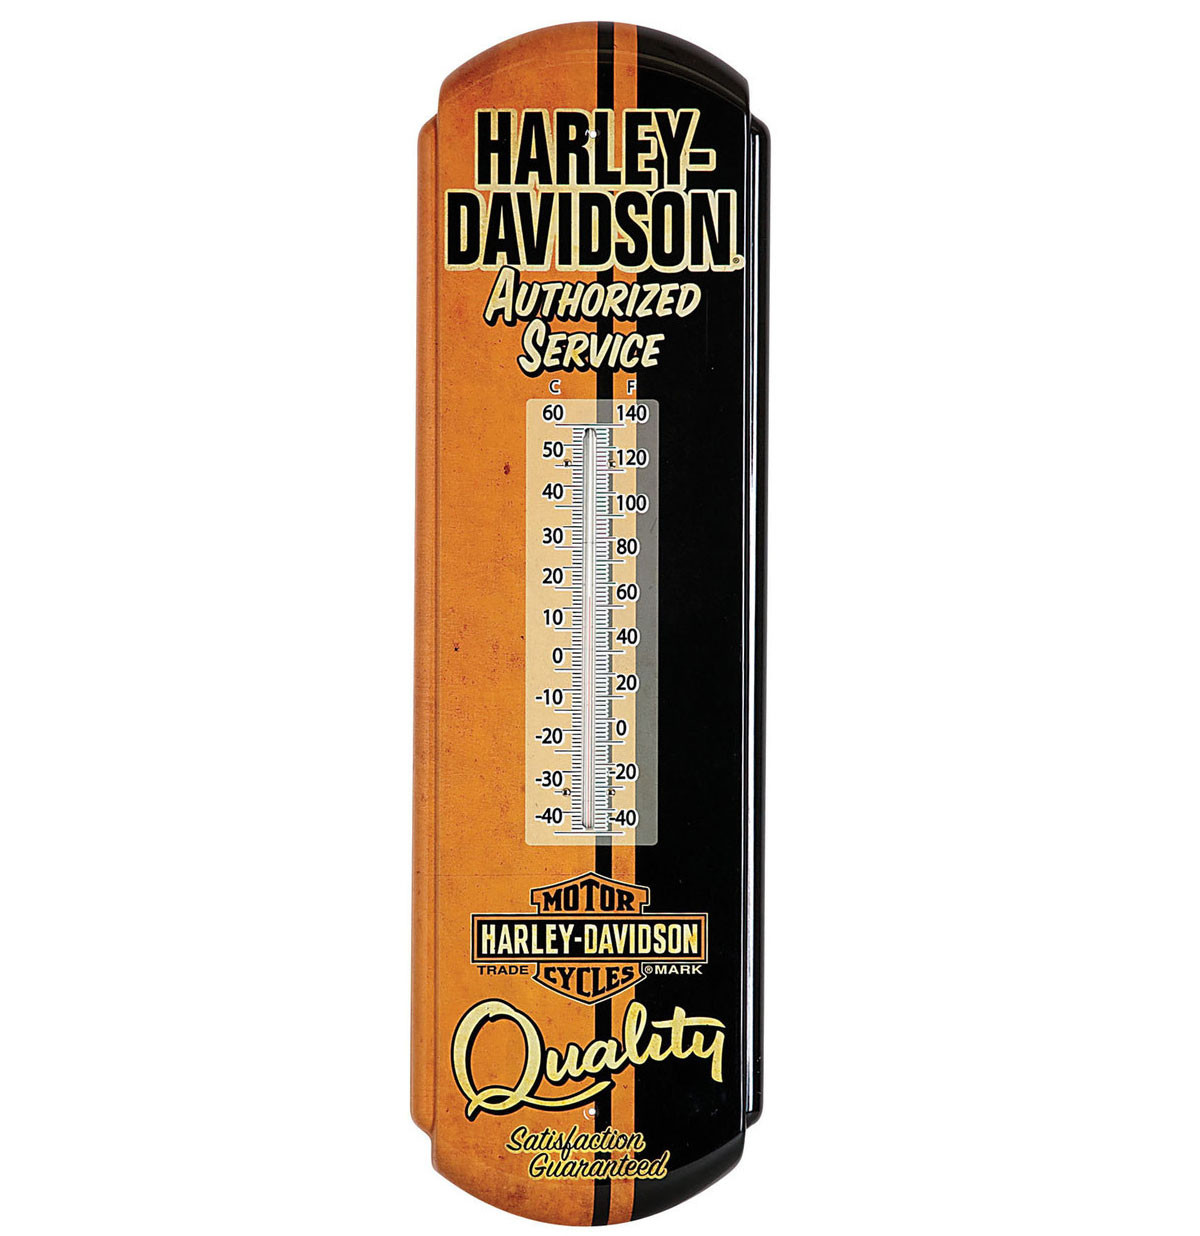 Harley-Davidson Authorized Service Tin Thermometer